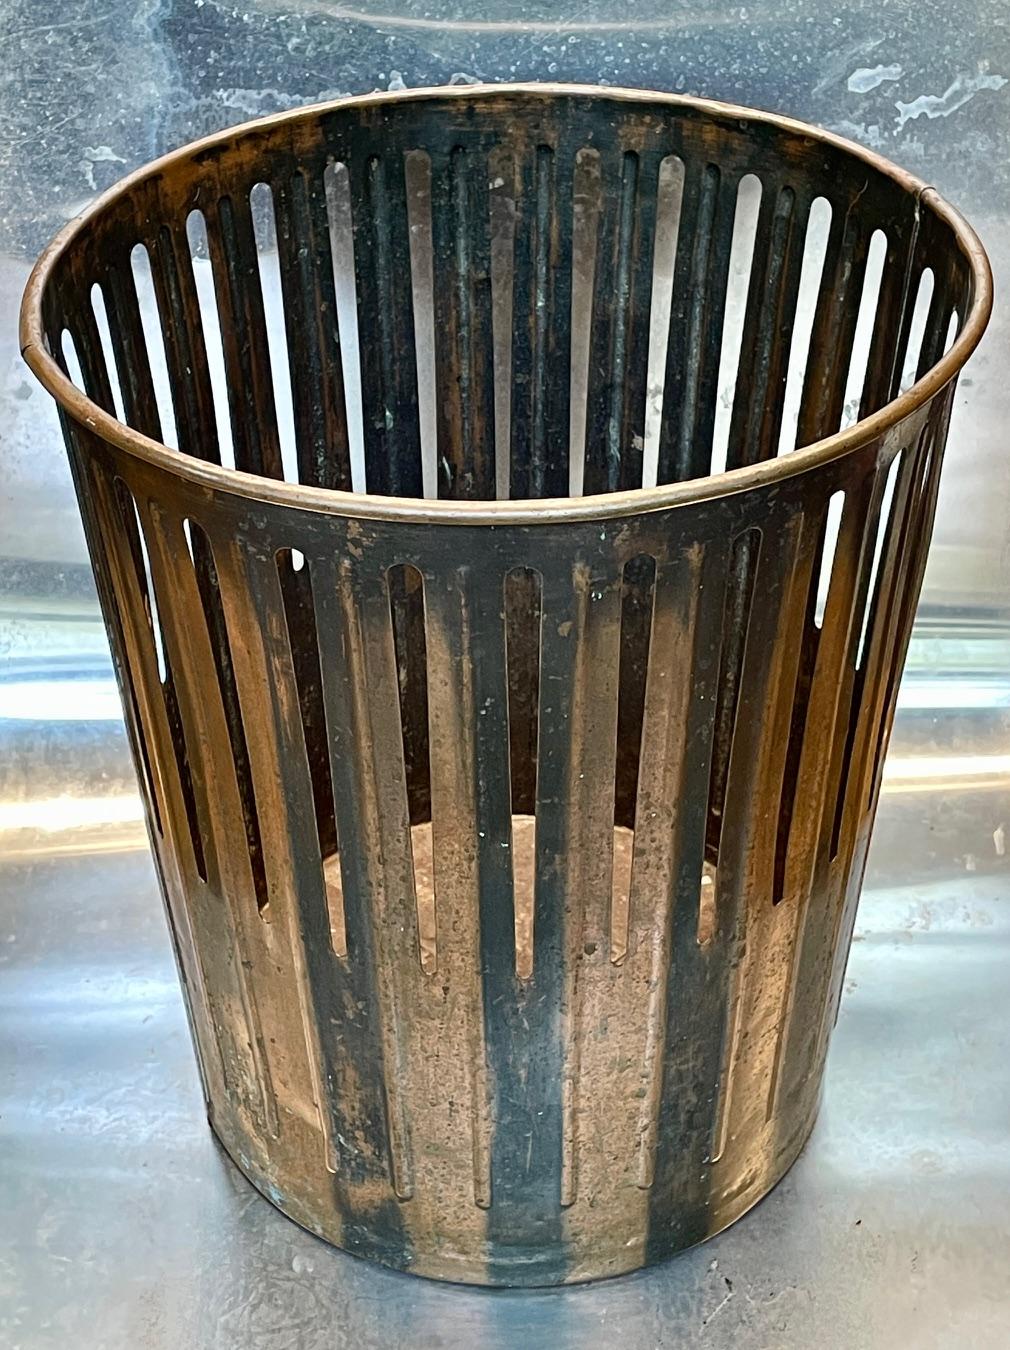 Japanned Copper Trash Can Wastebasket Industrial Loft Victorian Factory Office In Good Condition For Sale In Hyattsville, MD